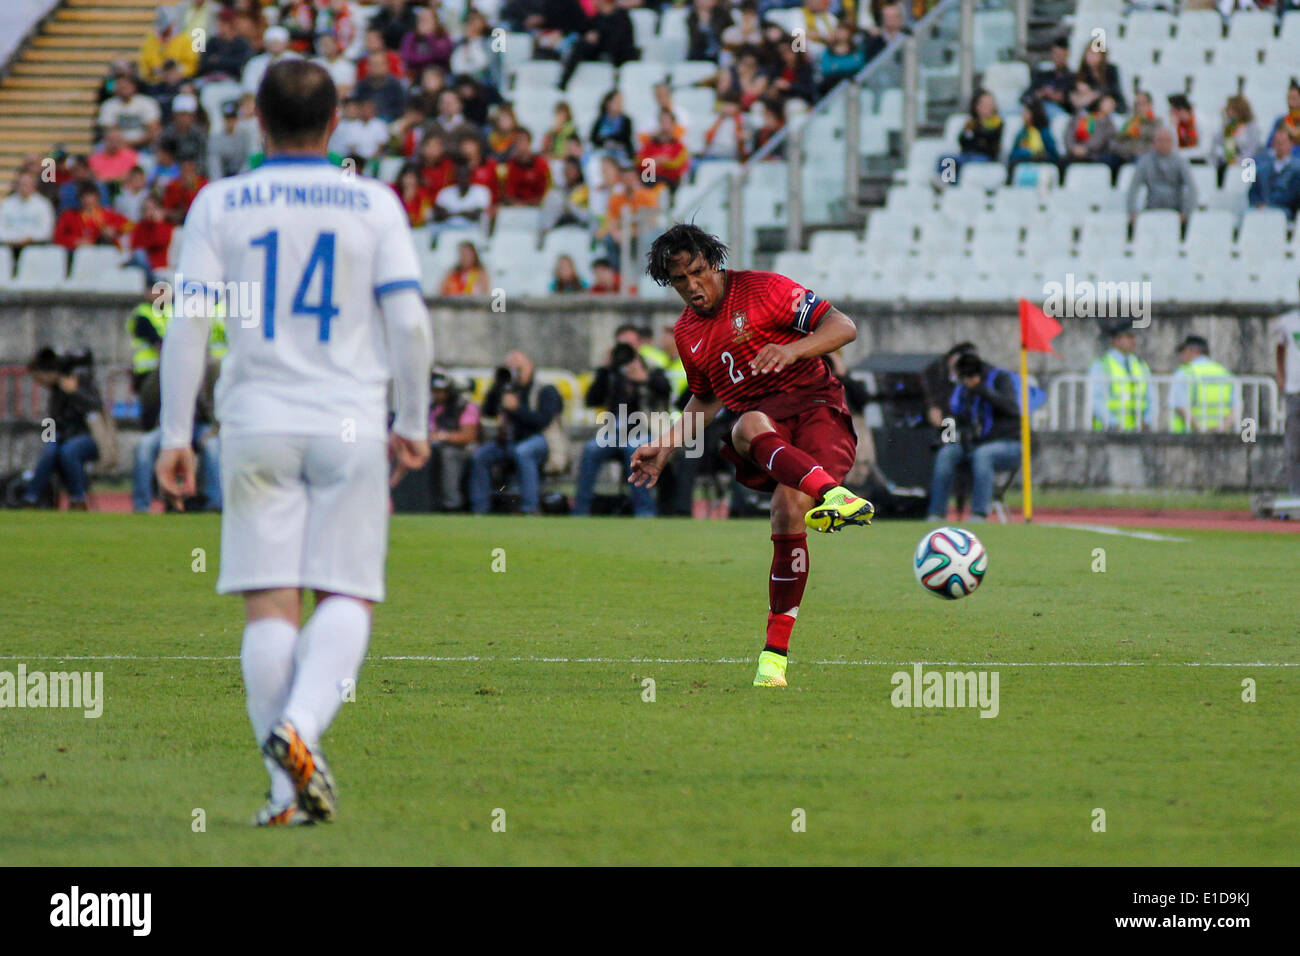 Lisbon, Porrtugal. 31st May, 2014. Portugal defender Bruno Alves (2) in action during preparatory friendly match for the World Cup at the National Stadium in Lisbon, Portugal, Saturday, May 31, 2014. Credit:  Leonardo Mota/Alamy Live News Stock Photo